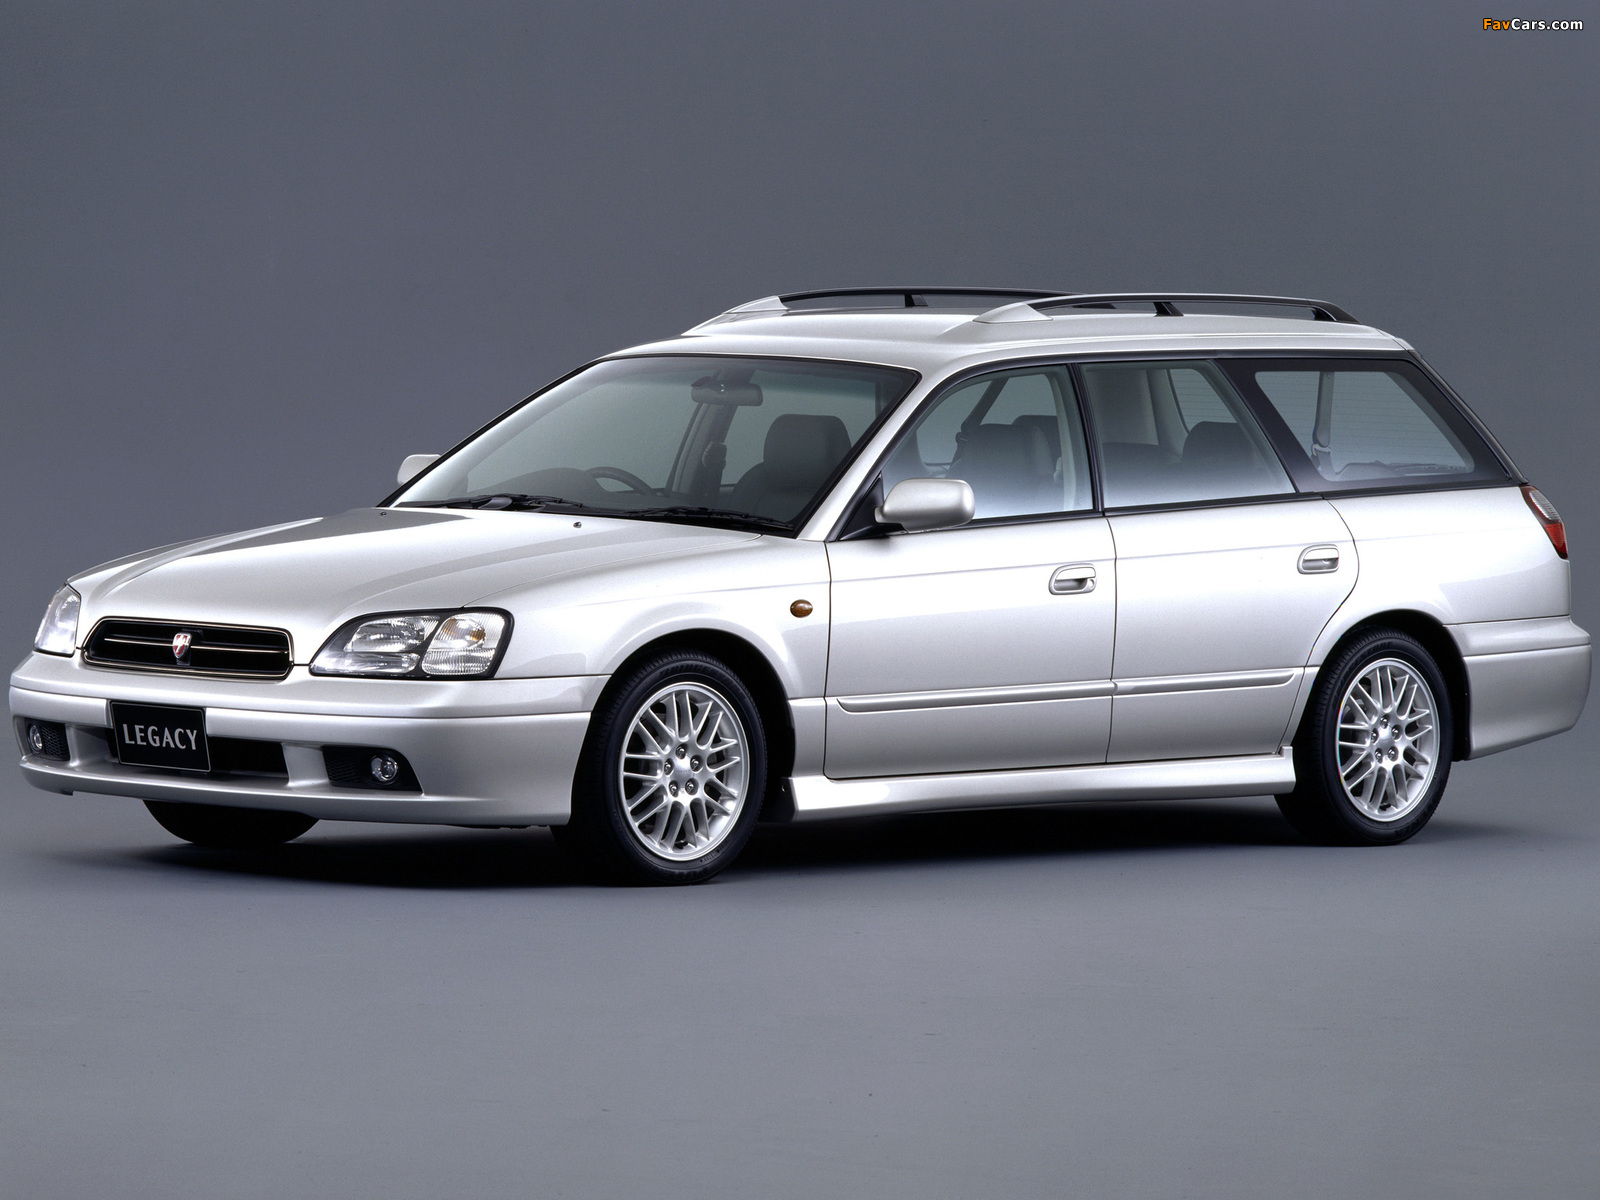 Subaru Legacy 2.5 250T Touring Wagon (BE,BH) 1998–2000 pictures (1600 x 1200)